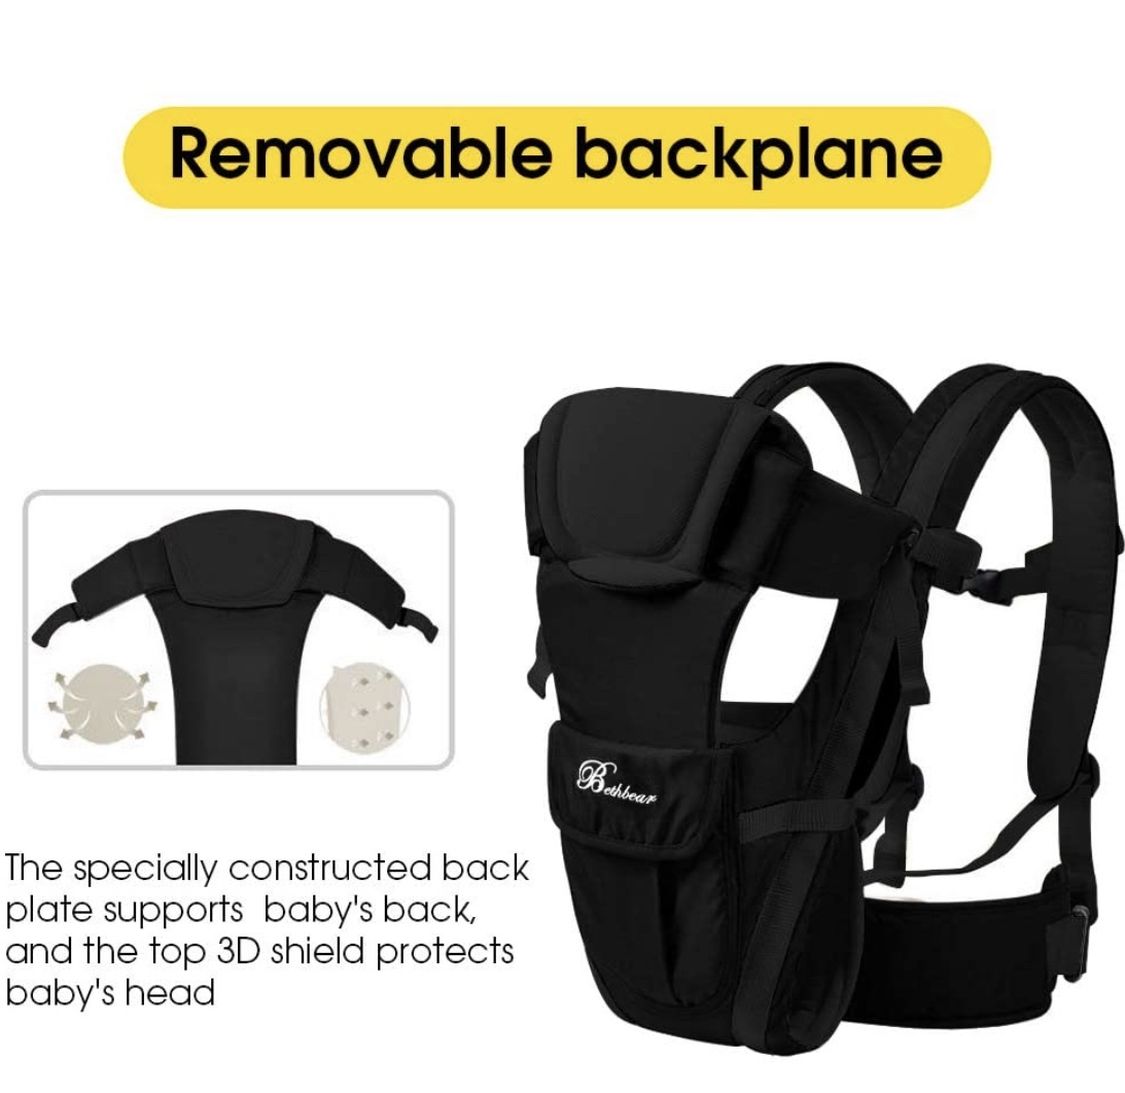 NEW! Baby Carrier Wrap Newborn to Toddler, 6-in-1 Kangaroo Baby Carrier Backpack Front and Back for Dad and Mom, 0-36 Months